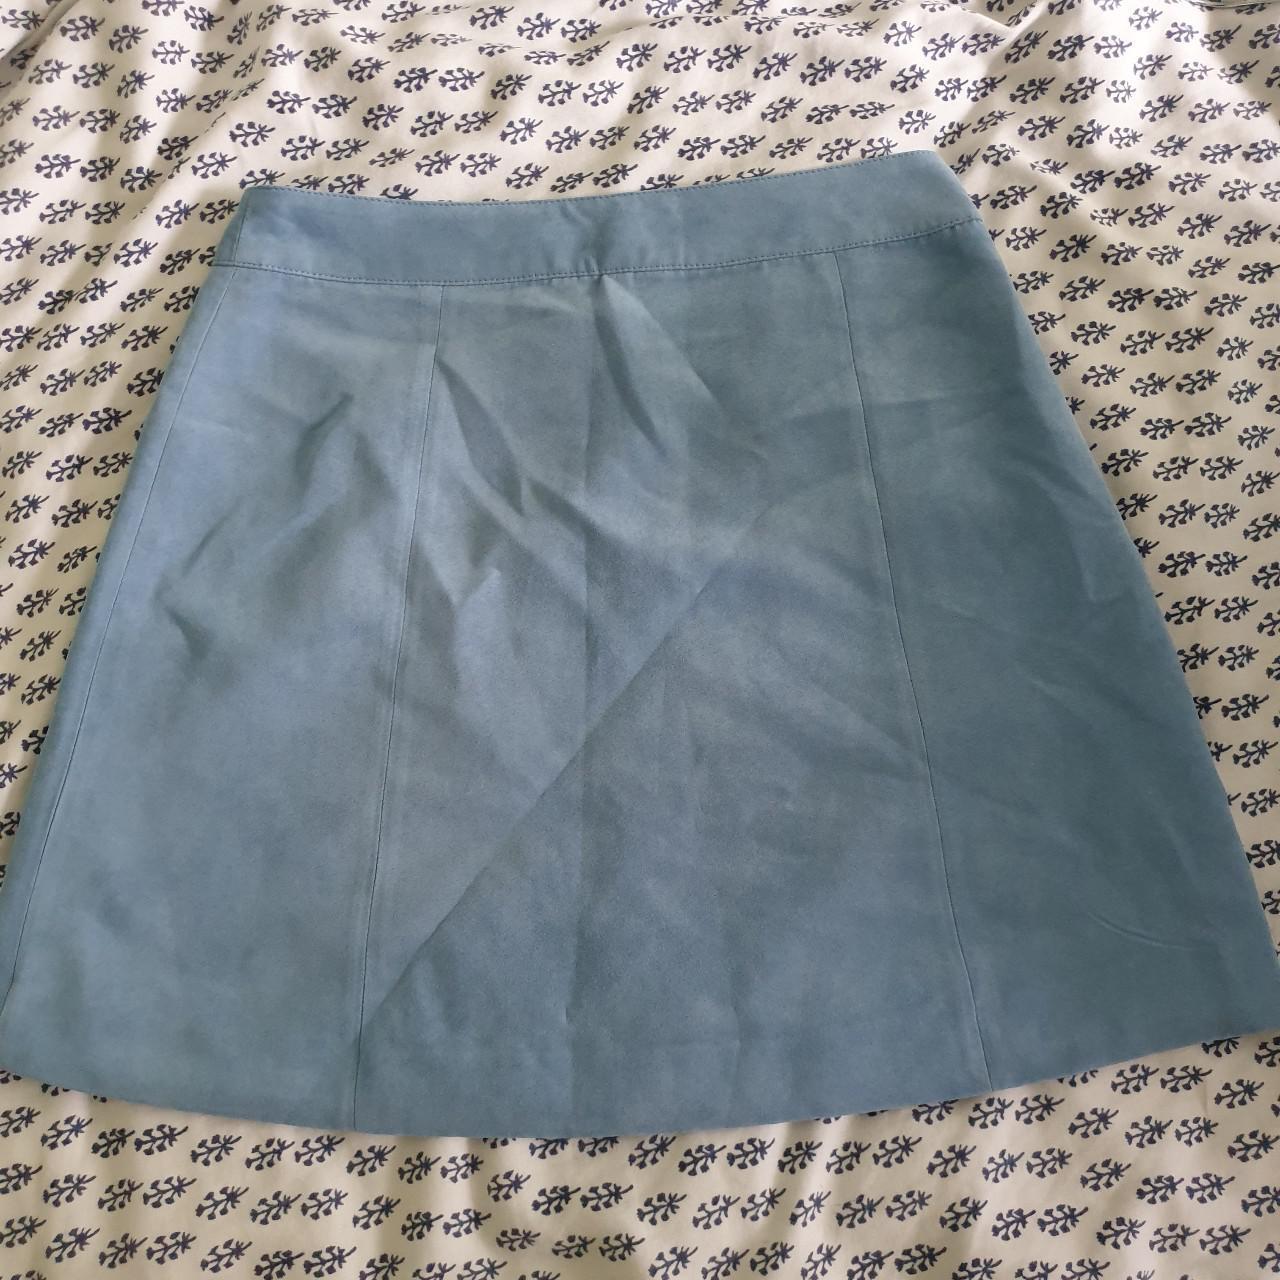 Product Image 4 - BNWT H&M suede mini skirt